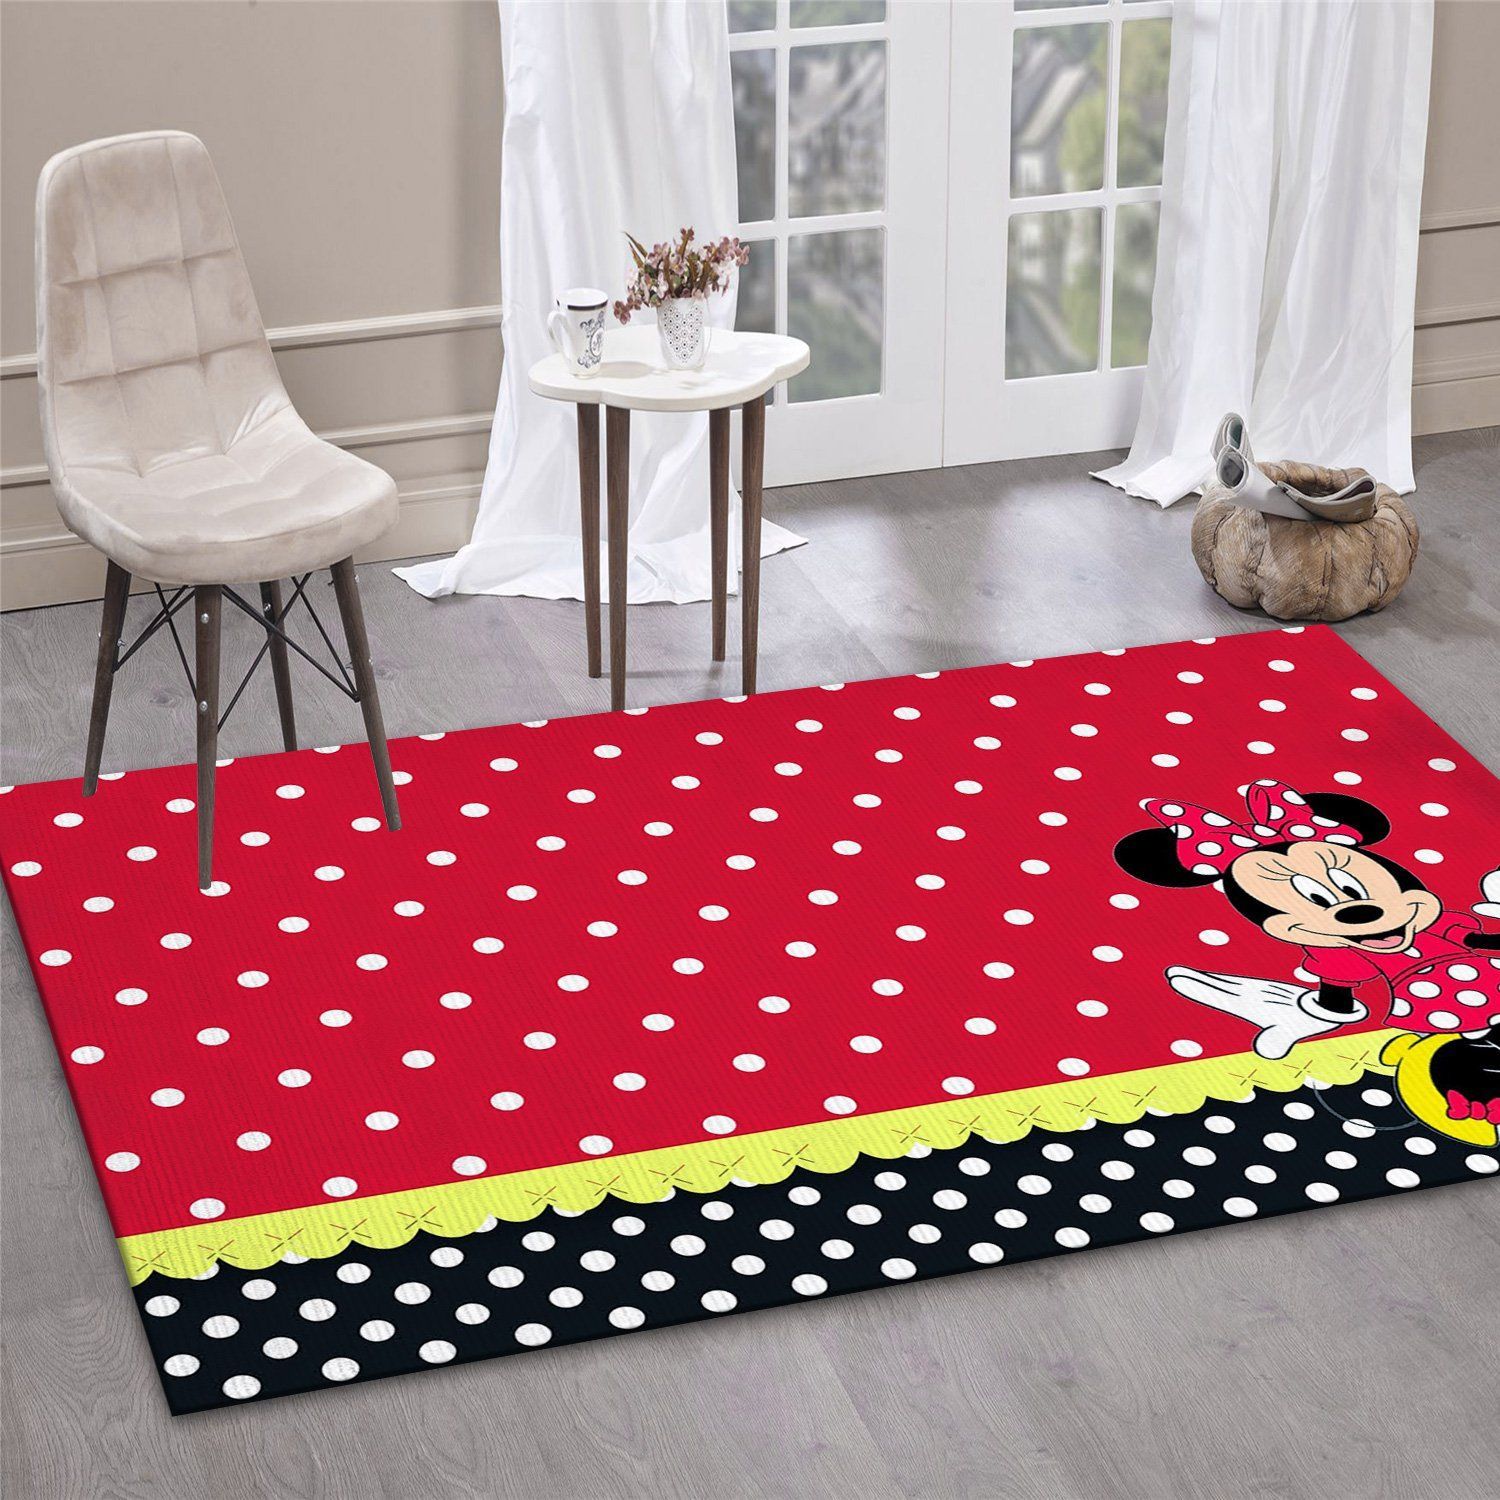 Minnie Mouse Ver11 Movie Area Rug Bedroom Rug Christmas Gift US Decor - Indoor Outdoor Rugs 3